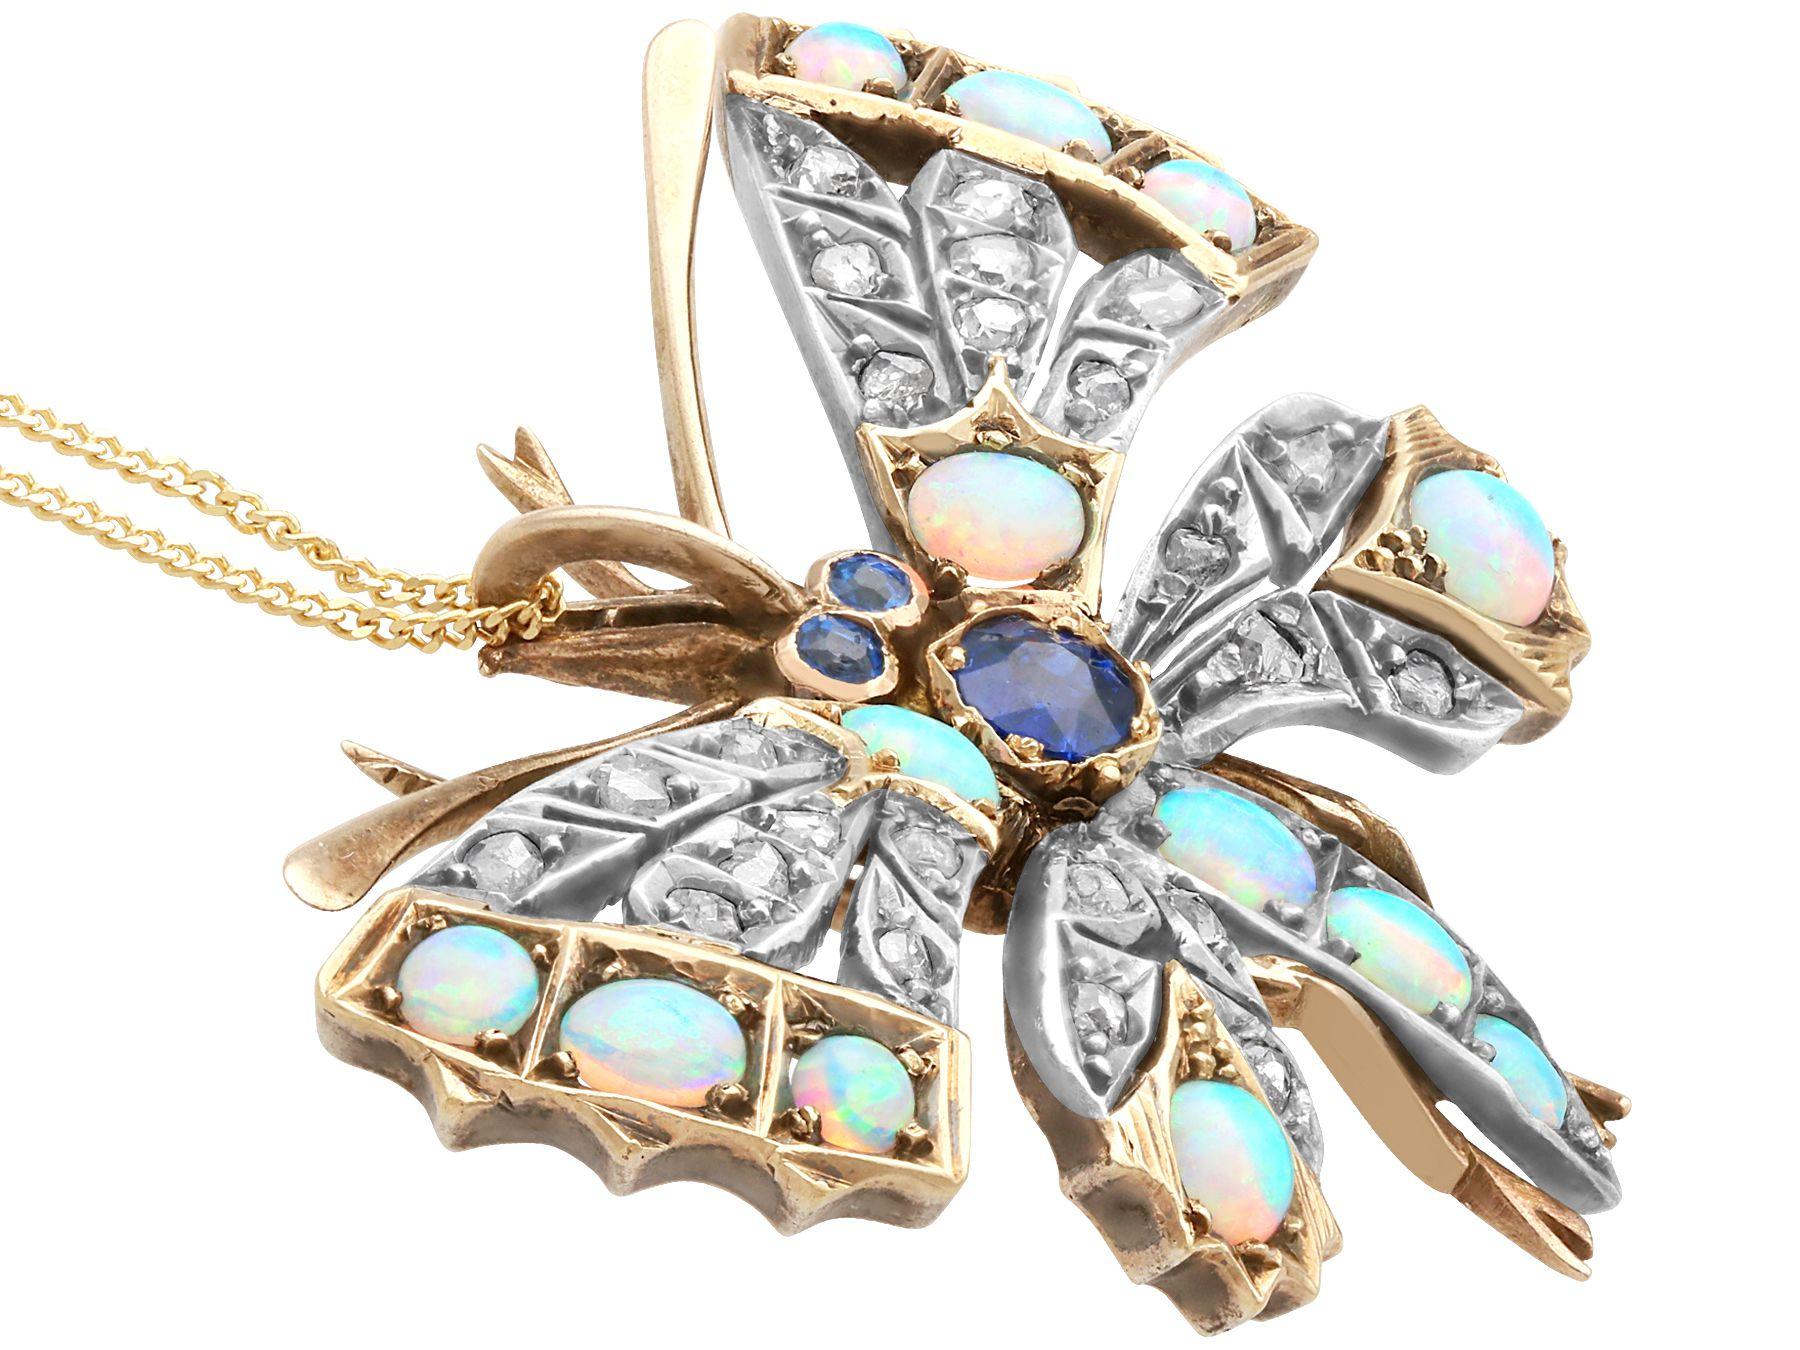 Antique Opal Diamond Sapphire Silver Set Butterfly Pendant/Brooch Circa 1880 In Excellent Condition For Sale In Jesmond, Newcastle Upon Tyne